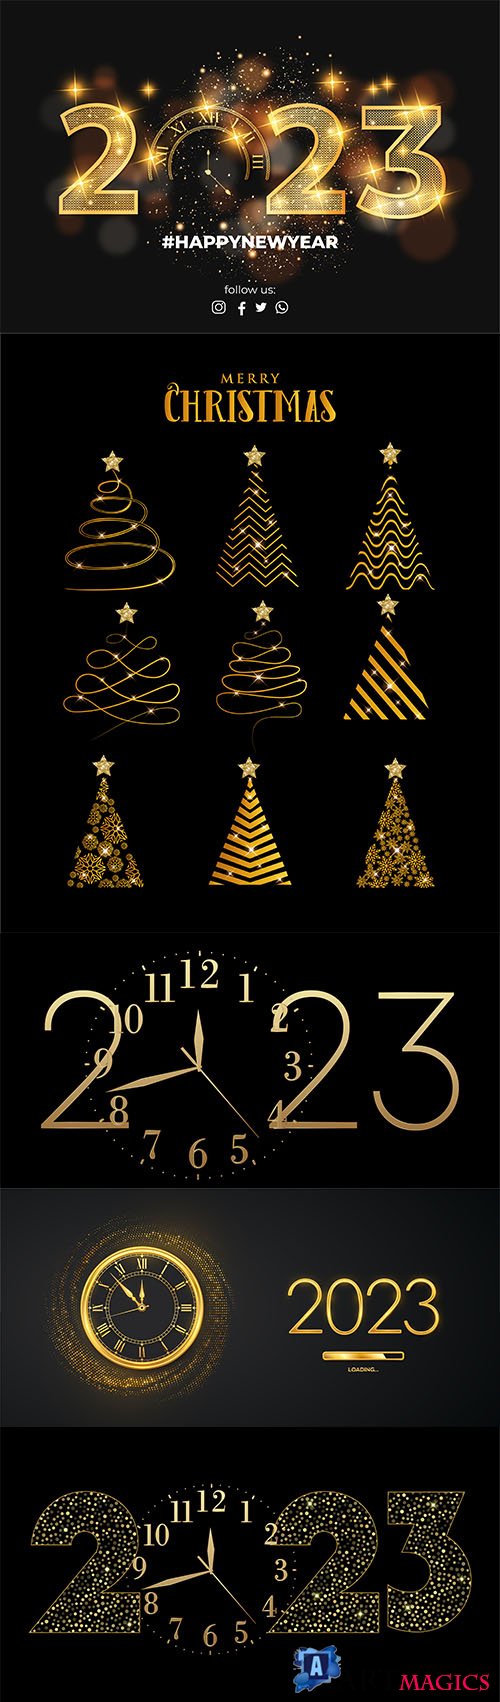 Happy new year 2023 and Merry christmas vector background